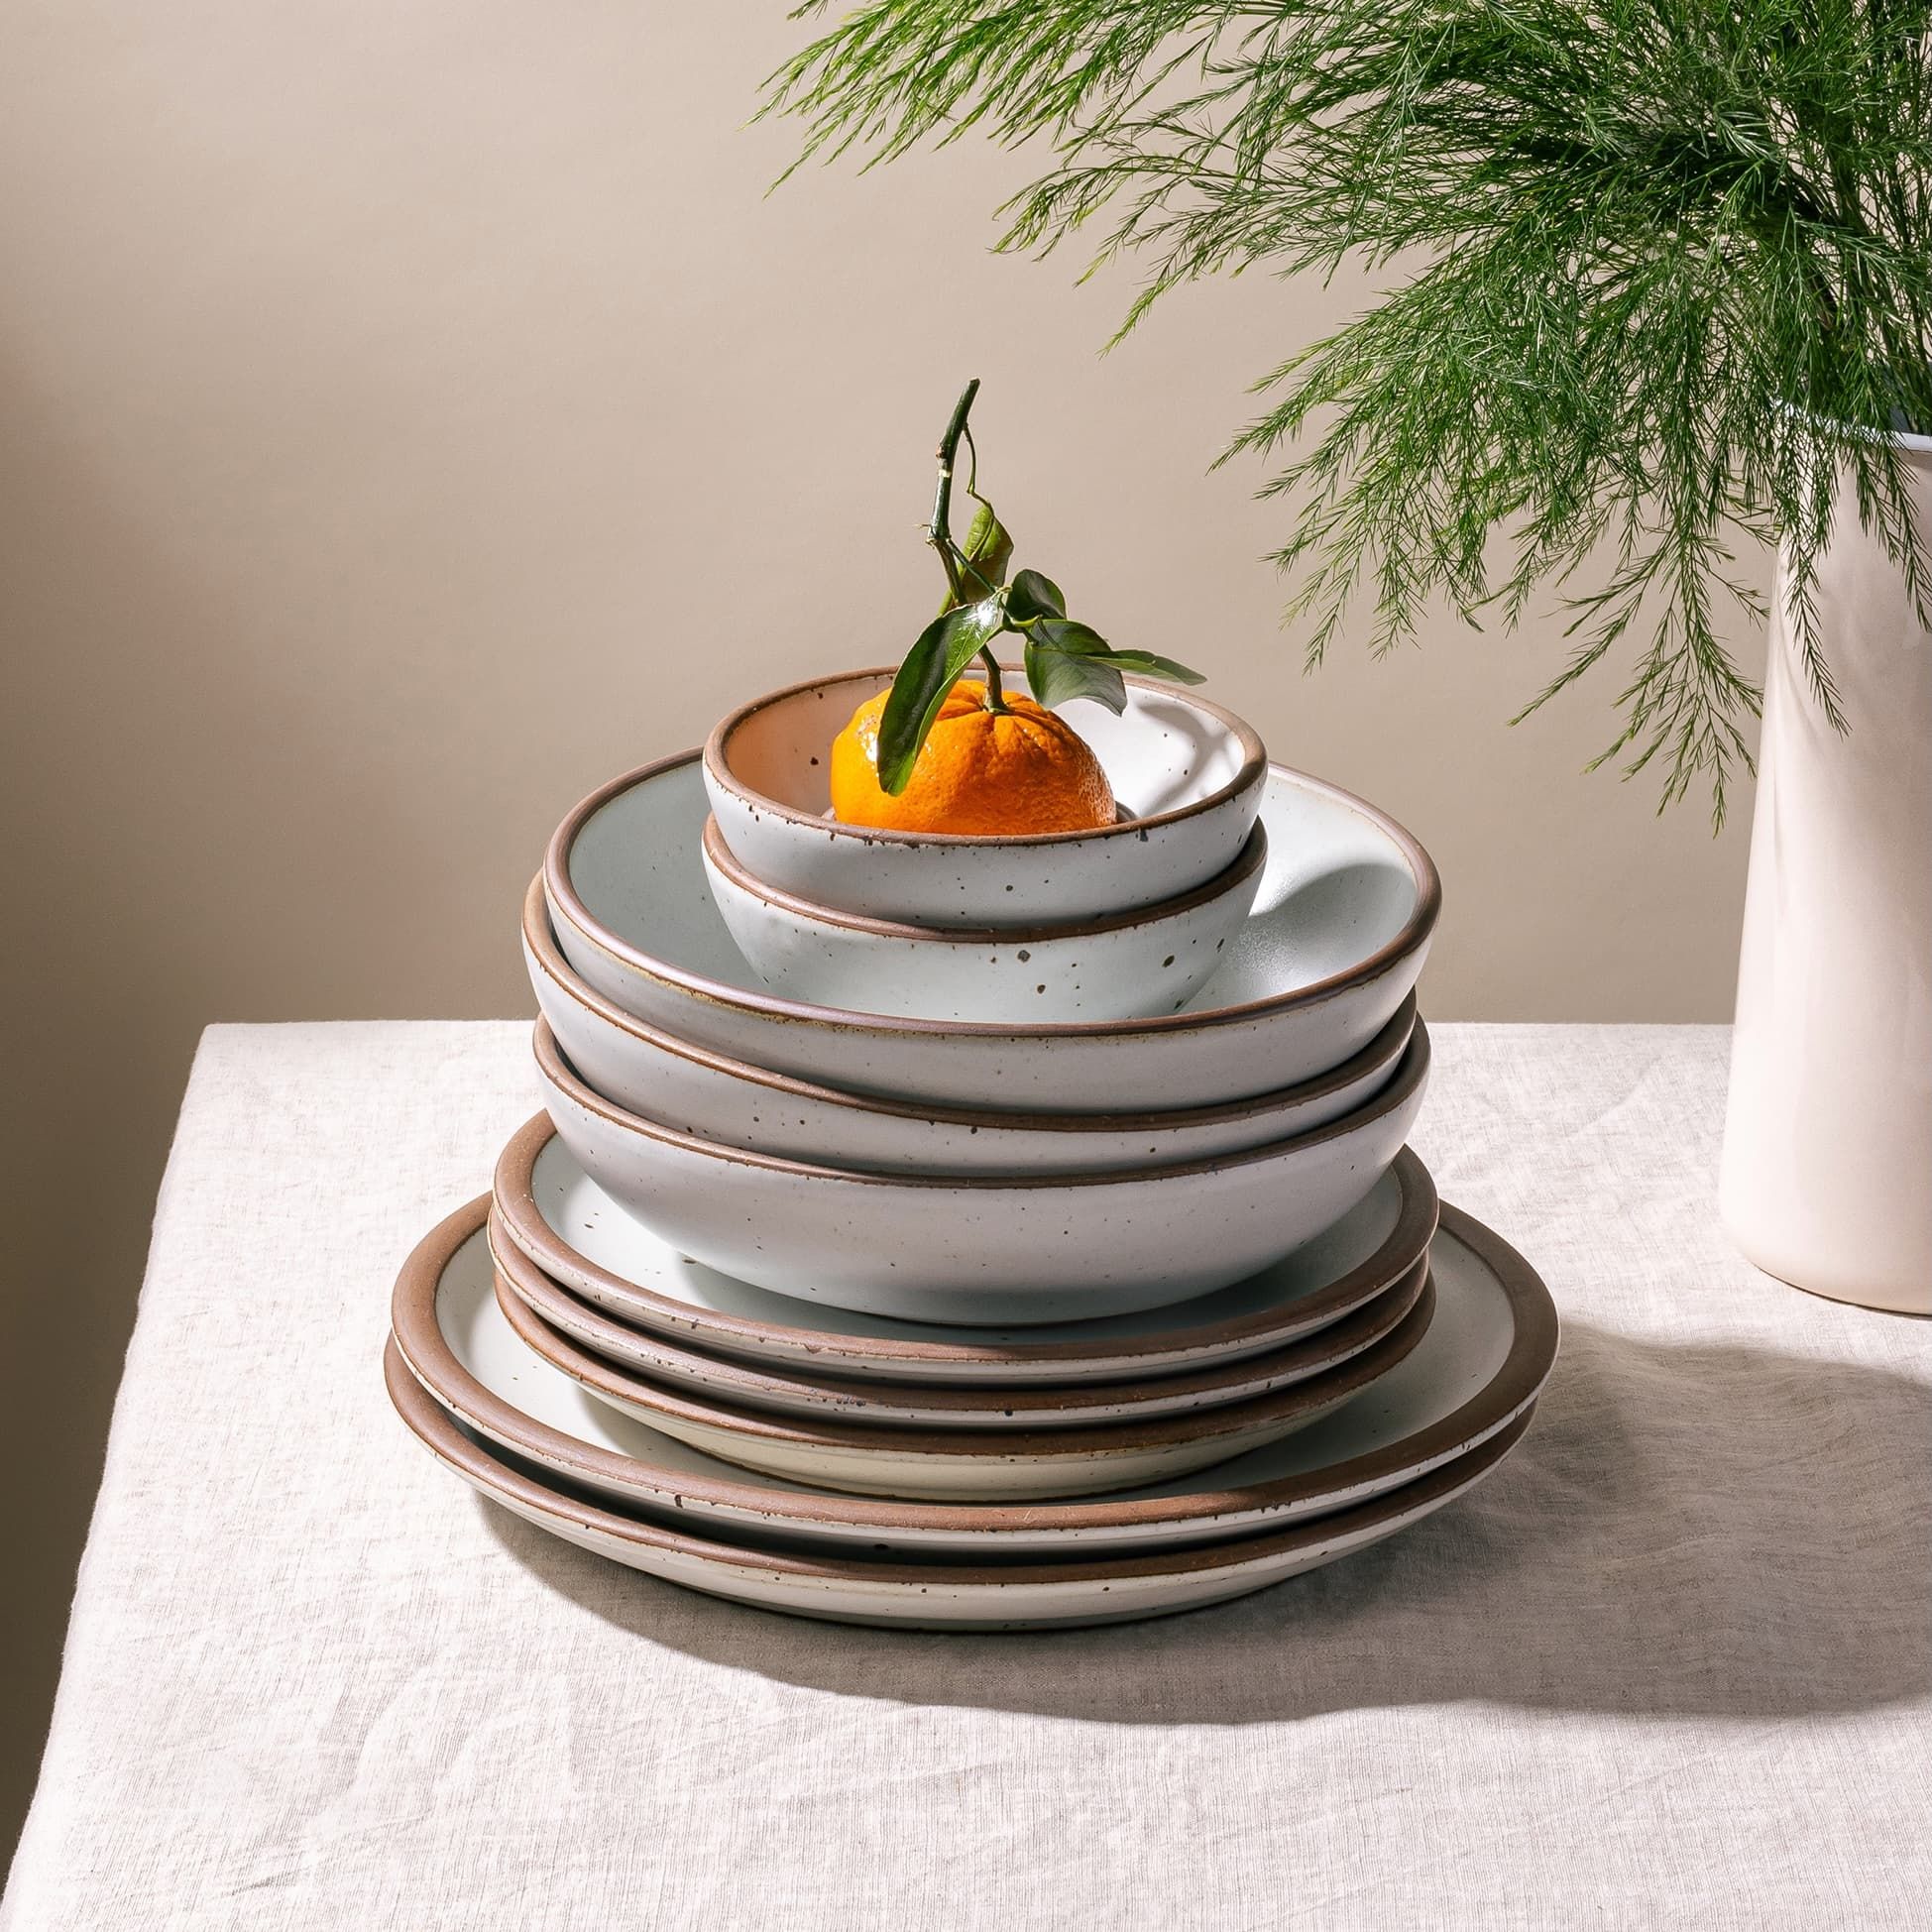 On a table sits a stack of ceramic bowls and plates in cream and cool white colors with an orange on top. To the right is a cream pitcher with greenery coming out of the top.